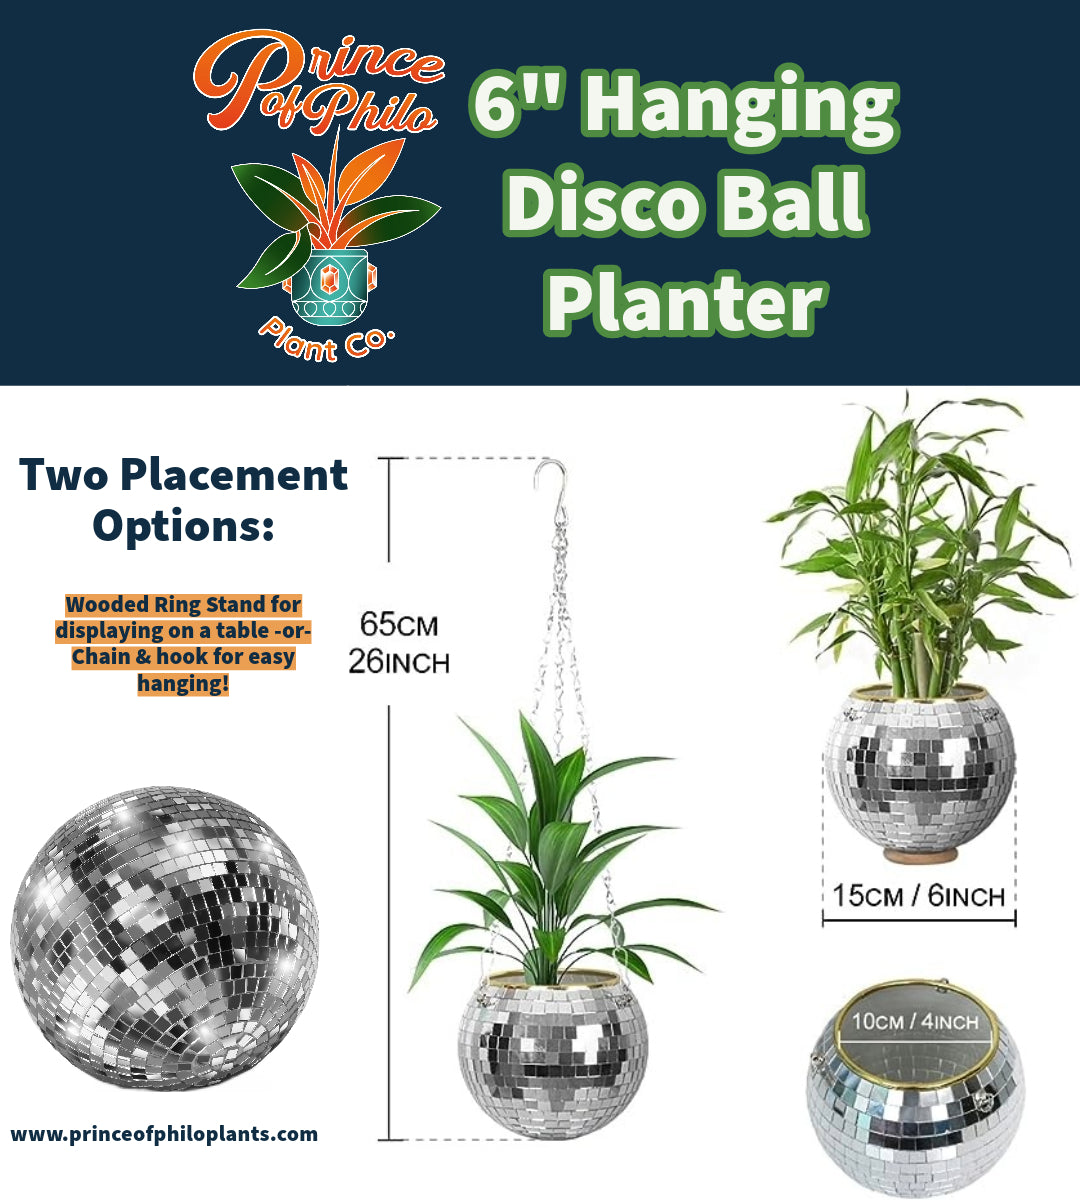 Diagram showing length of disco ball planter is 26 inches